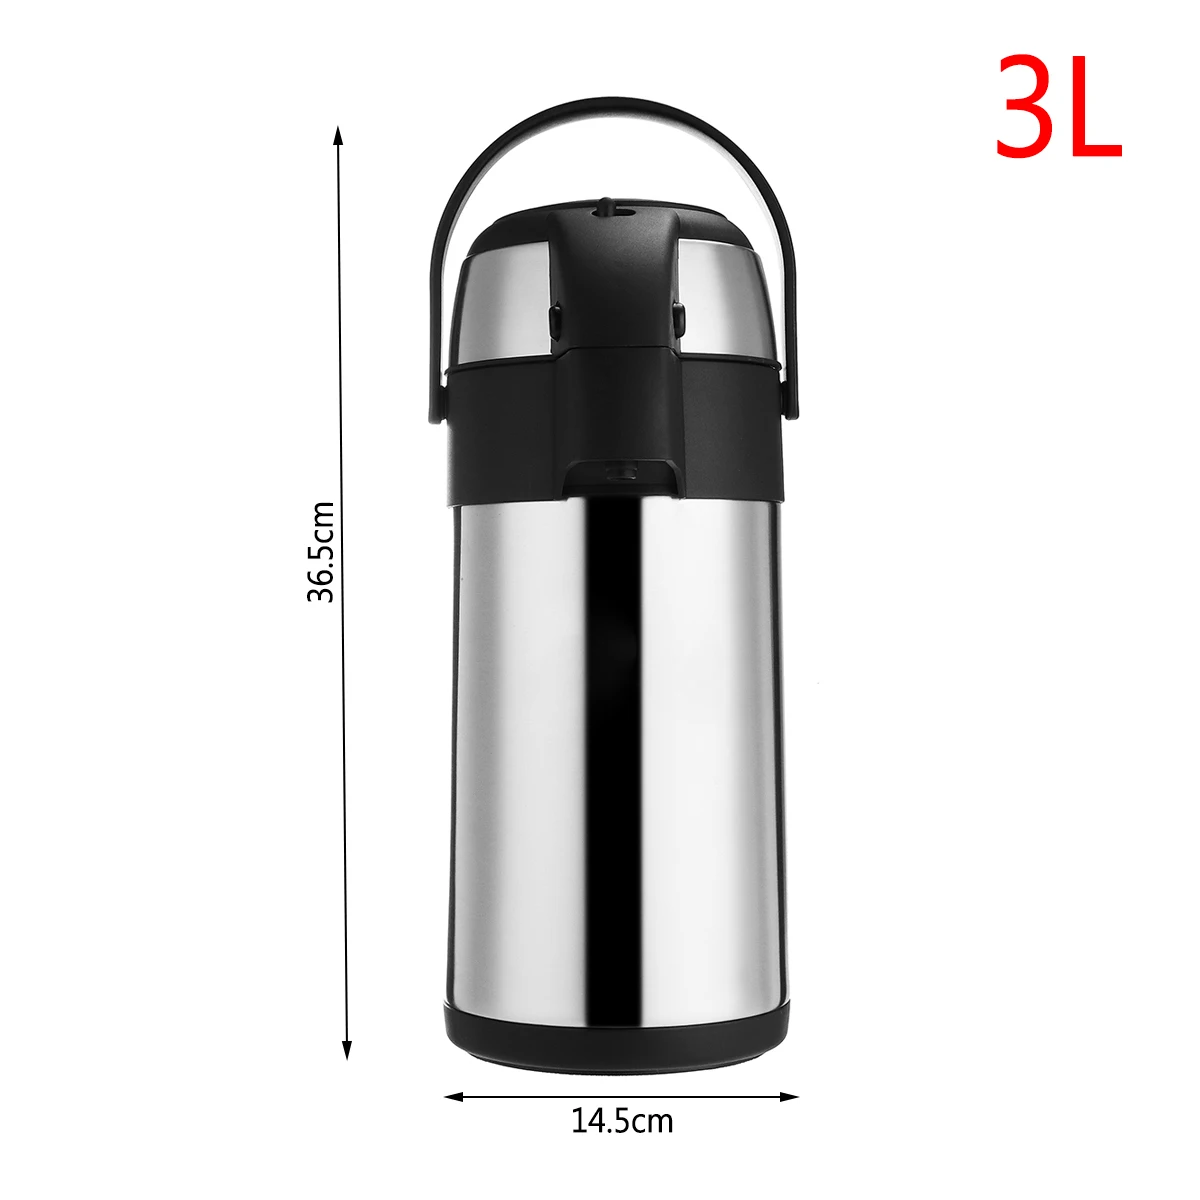 Thermal Coffee Flask Ideal for Hot & Cold Drinks Extra Strong for Catering Travel Commercial Insulated Vacuum Thermal Flask Jug Soup Royalford 3L Stainless Steel Airpot Pump Action Airpot